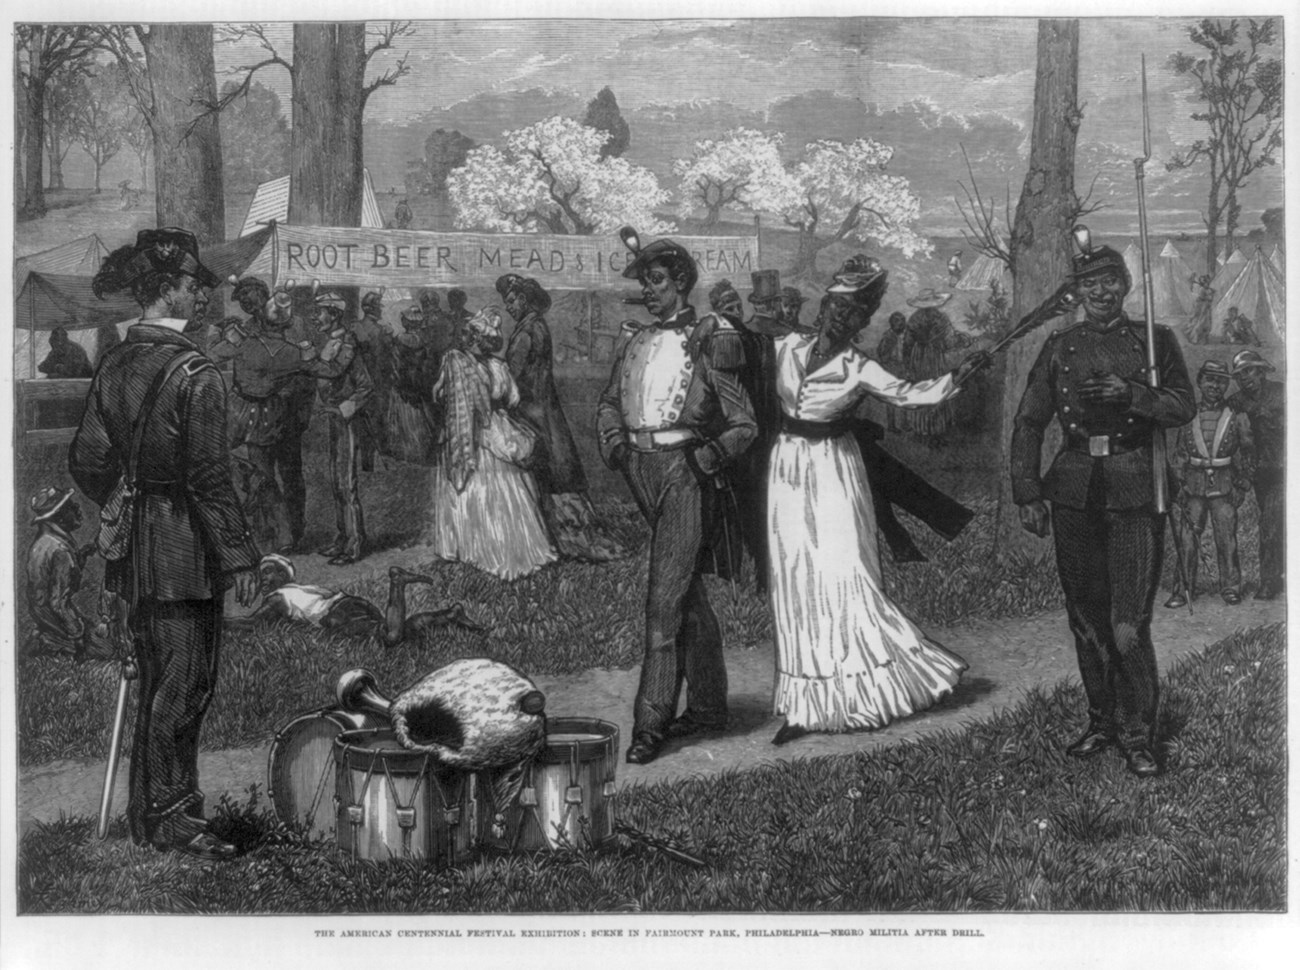 An illustration of uniformed and armed Black militiamen in Fairmount Park, Philadelphia, at the 1876 Centennial Festival, included in an issue of the Illustrated London News.